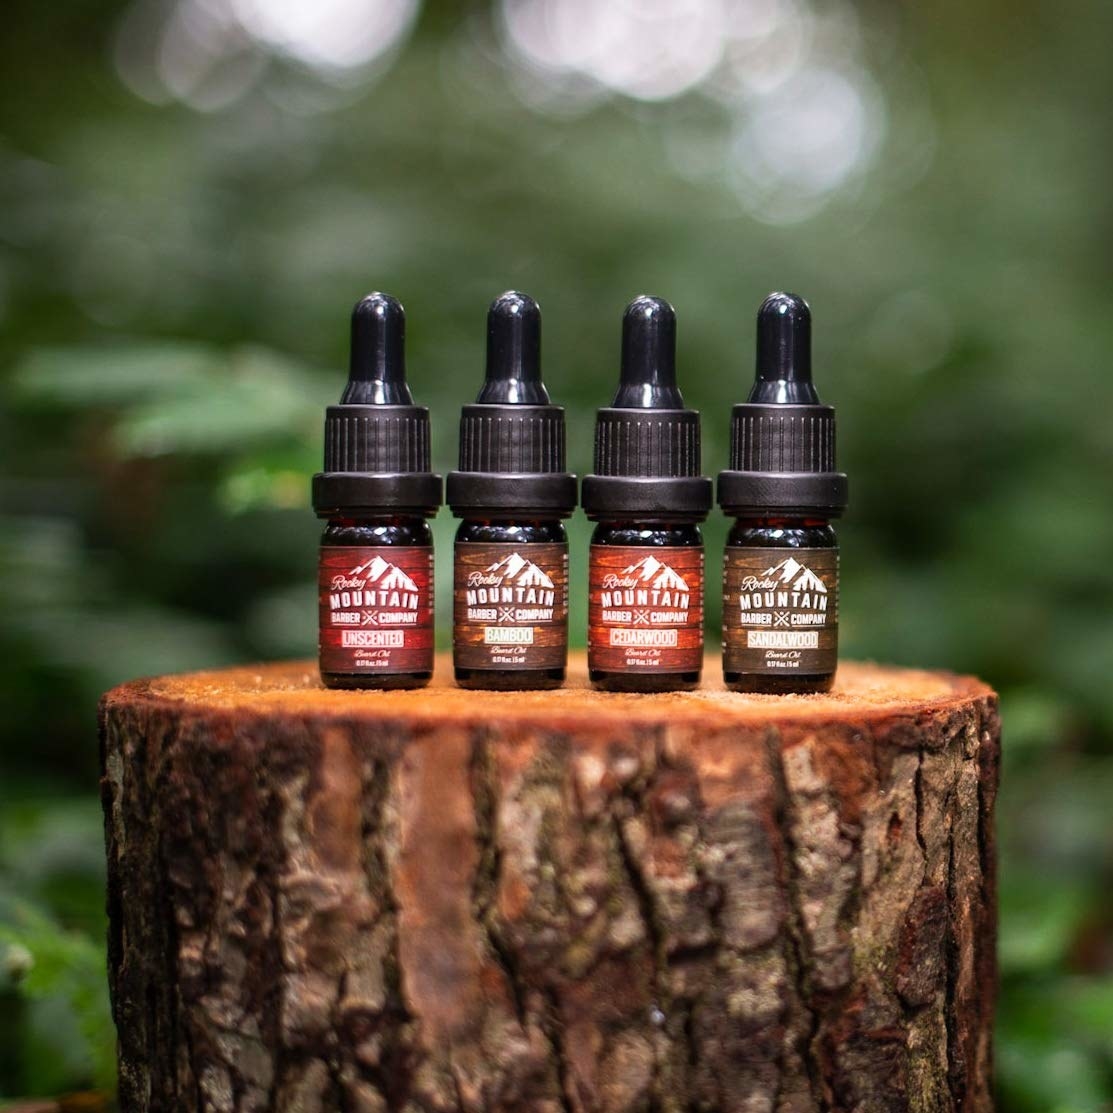 Four bear oils lined up on a stump